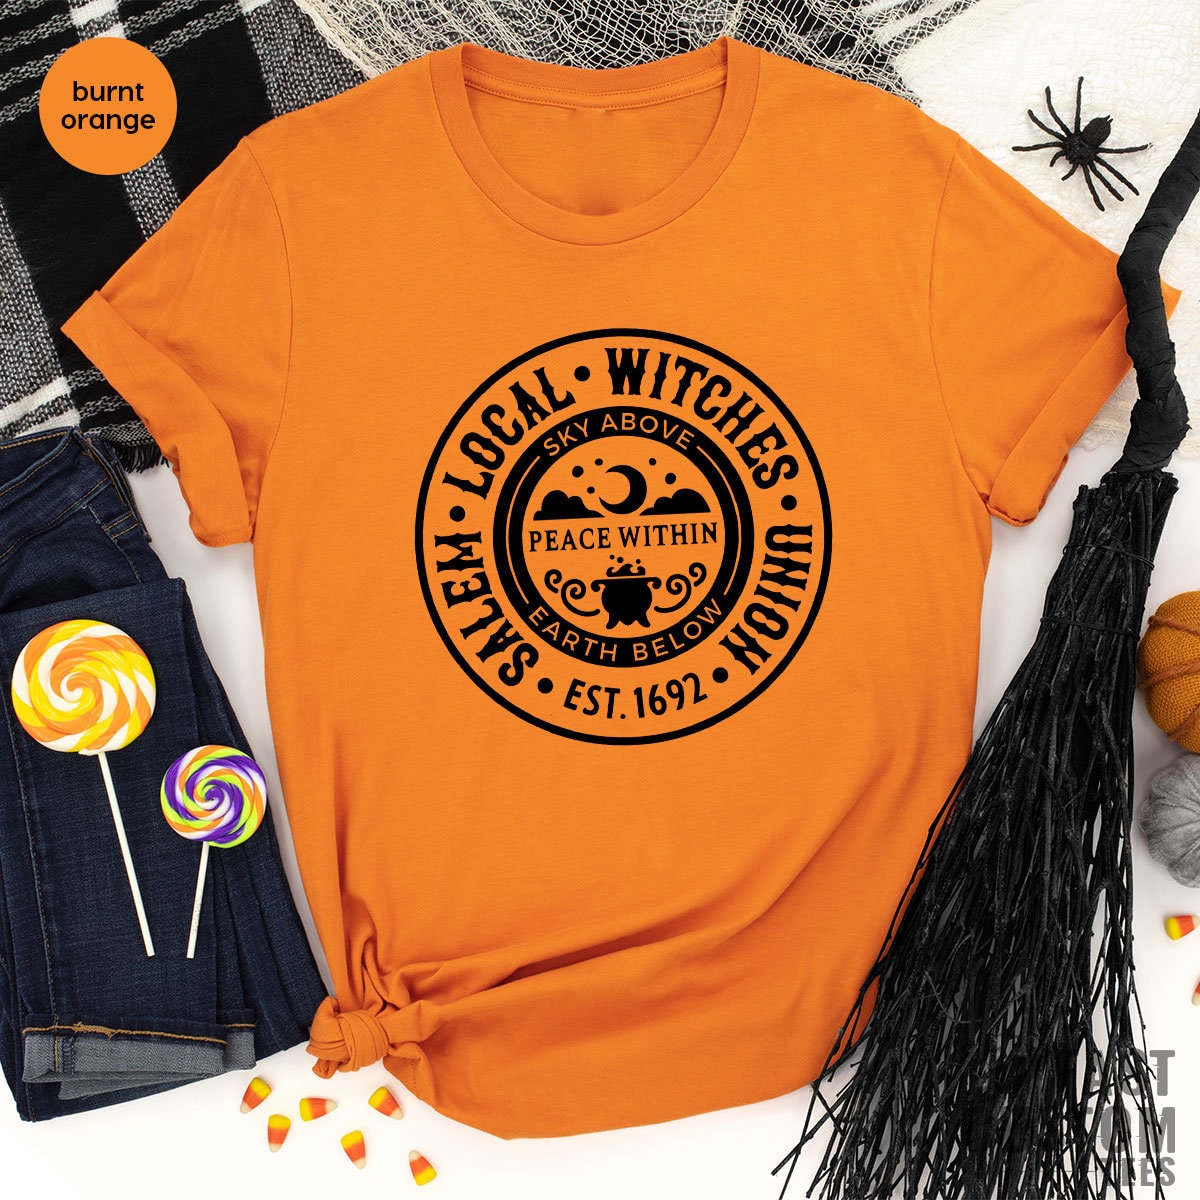 Local Witches Shirt, Halloween Shirt, Witch Shirt, Salem Local Witches Union Shirt, Fall Shirt, Halloween Party Shirt - Fastdeliverytees.com